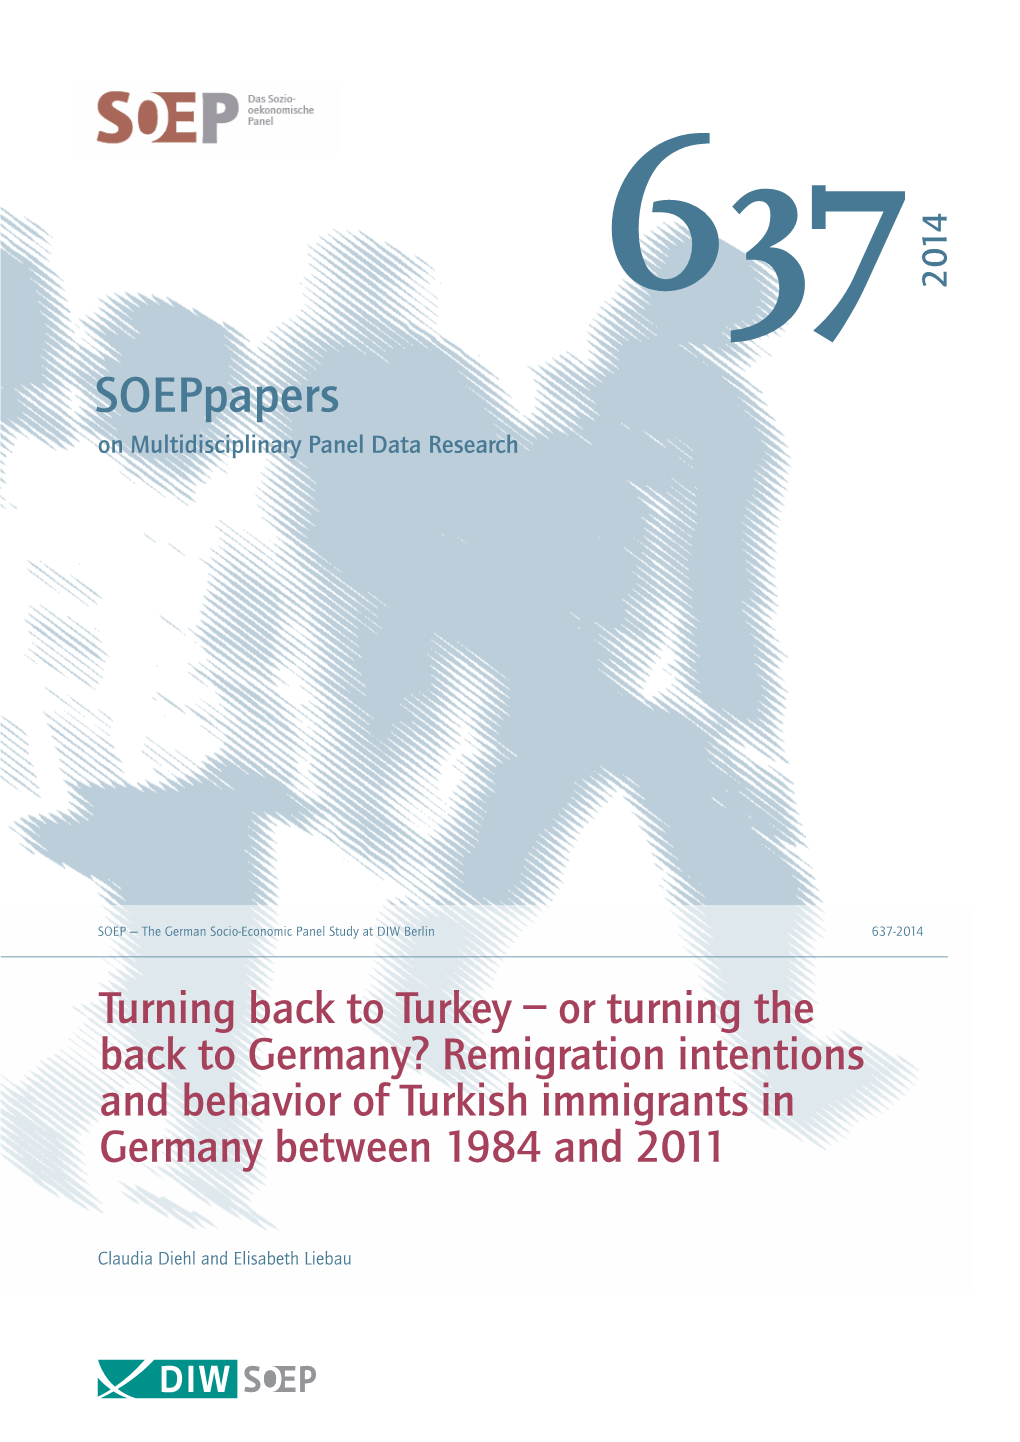 Remigration Intentions and Behavior of Turkish Immigrants in Germany Between 1984 and 2011